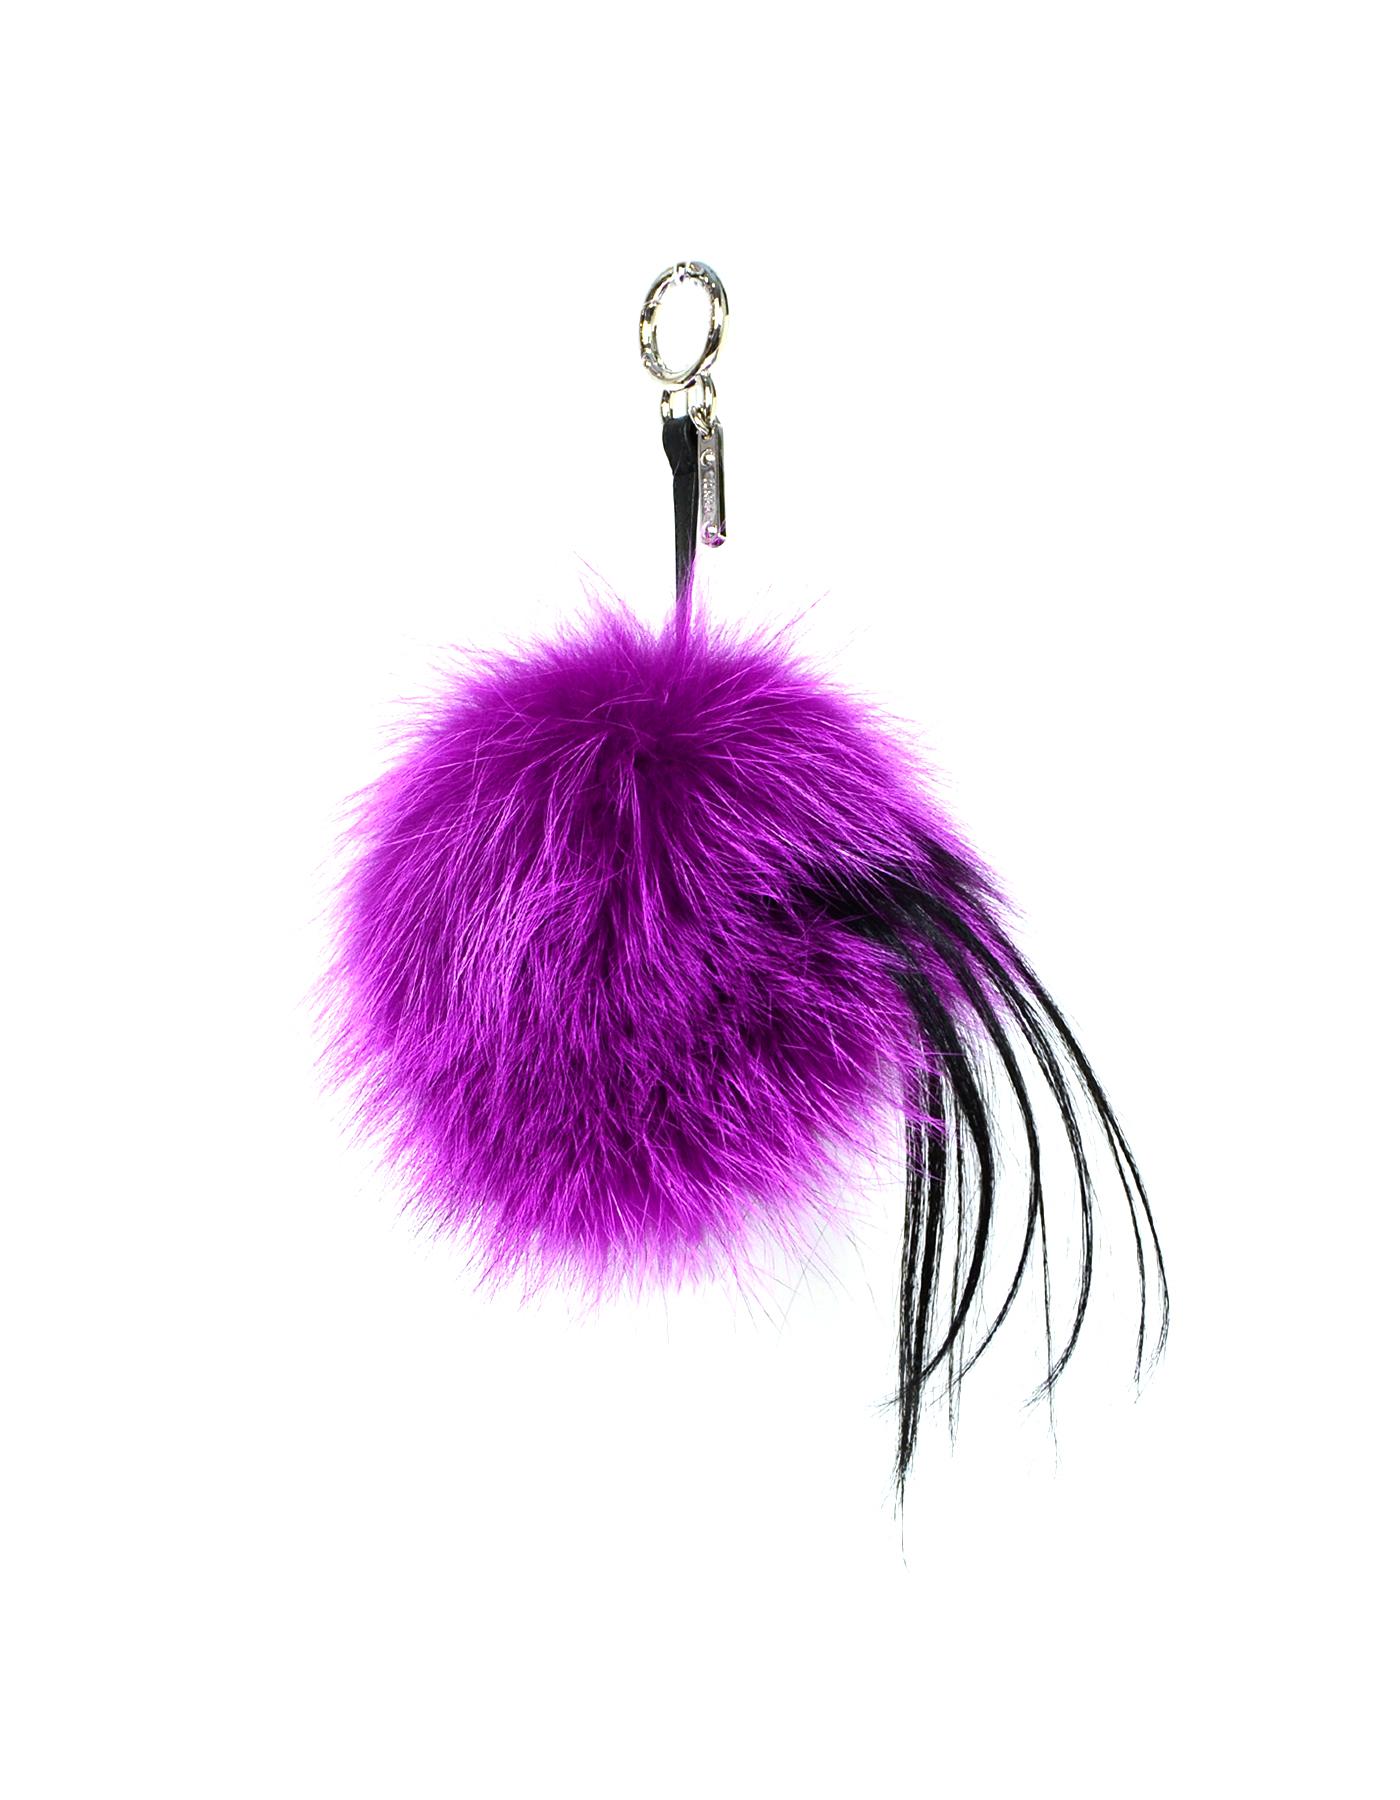 Fendi Purple Flamingo Rosa Rabbit Mink/Fox Fur Oret Monster Bag Bug

Made In: Italy 
Color: Purple, Black, Red
Materials: Mink, Fox Fur
Overall Condition: Excellent pre-owned condition

Measurements: 
~ 5